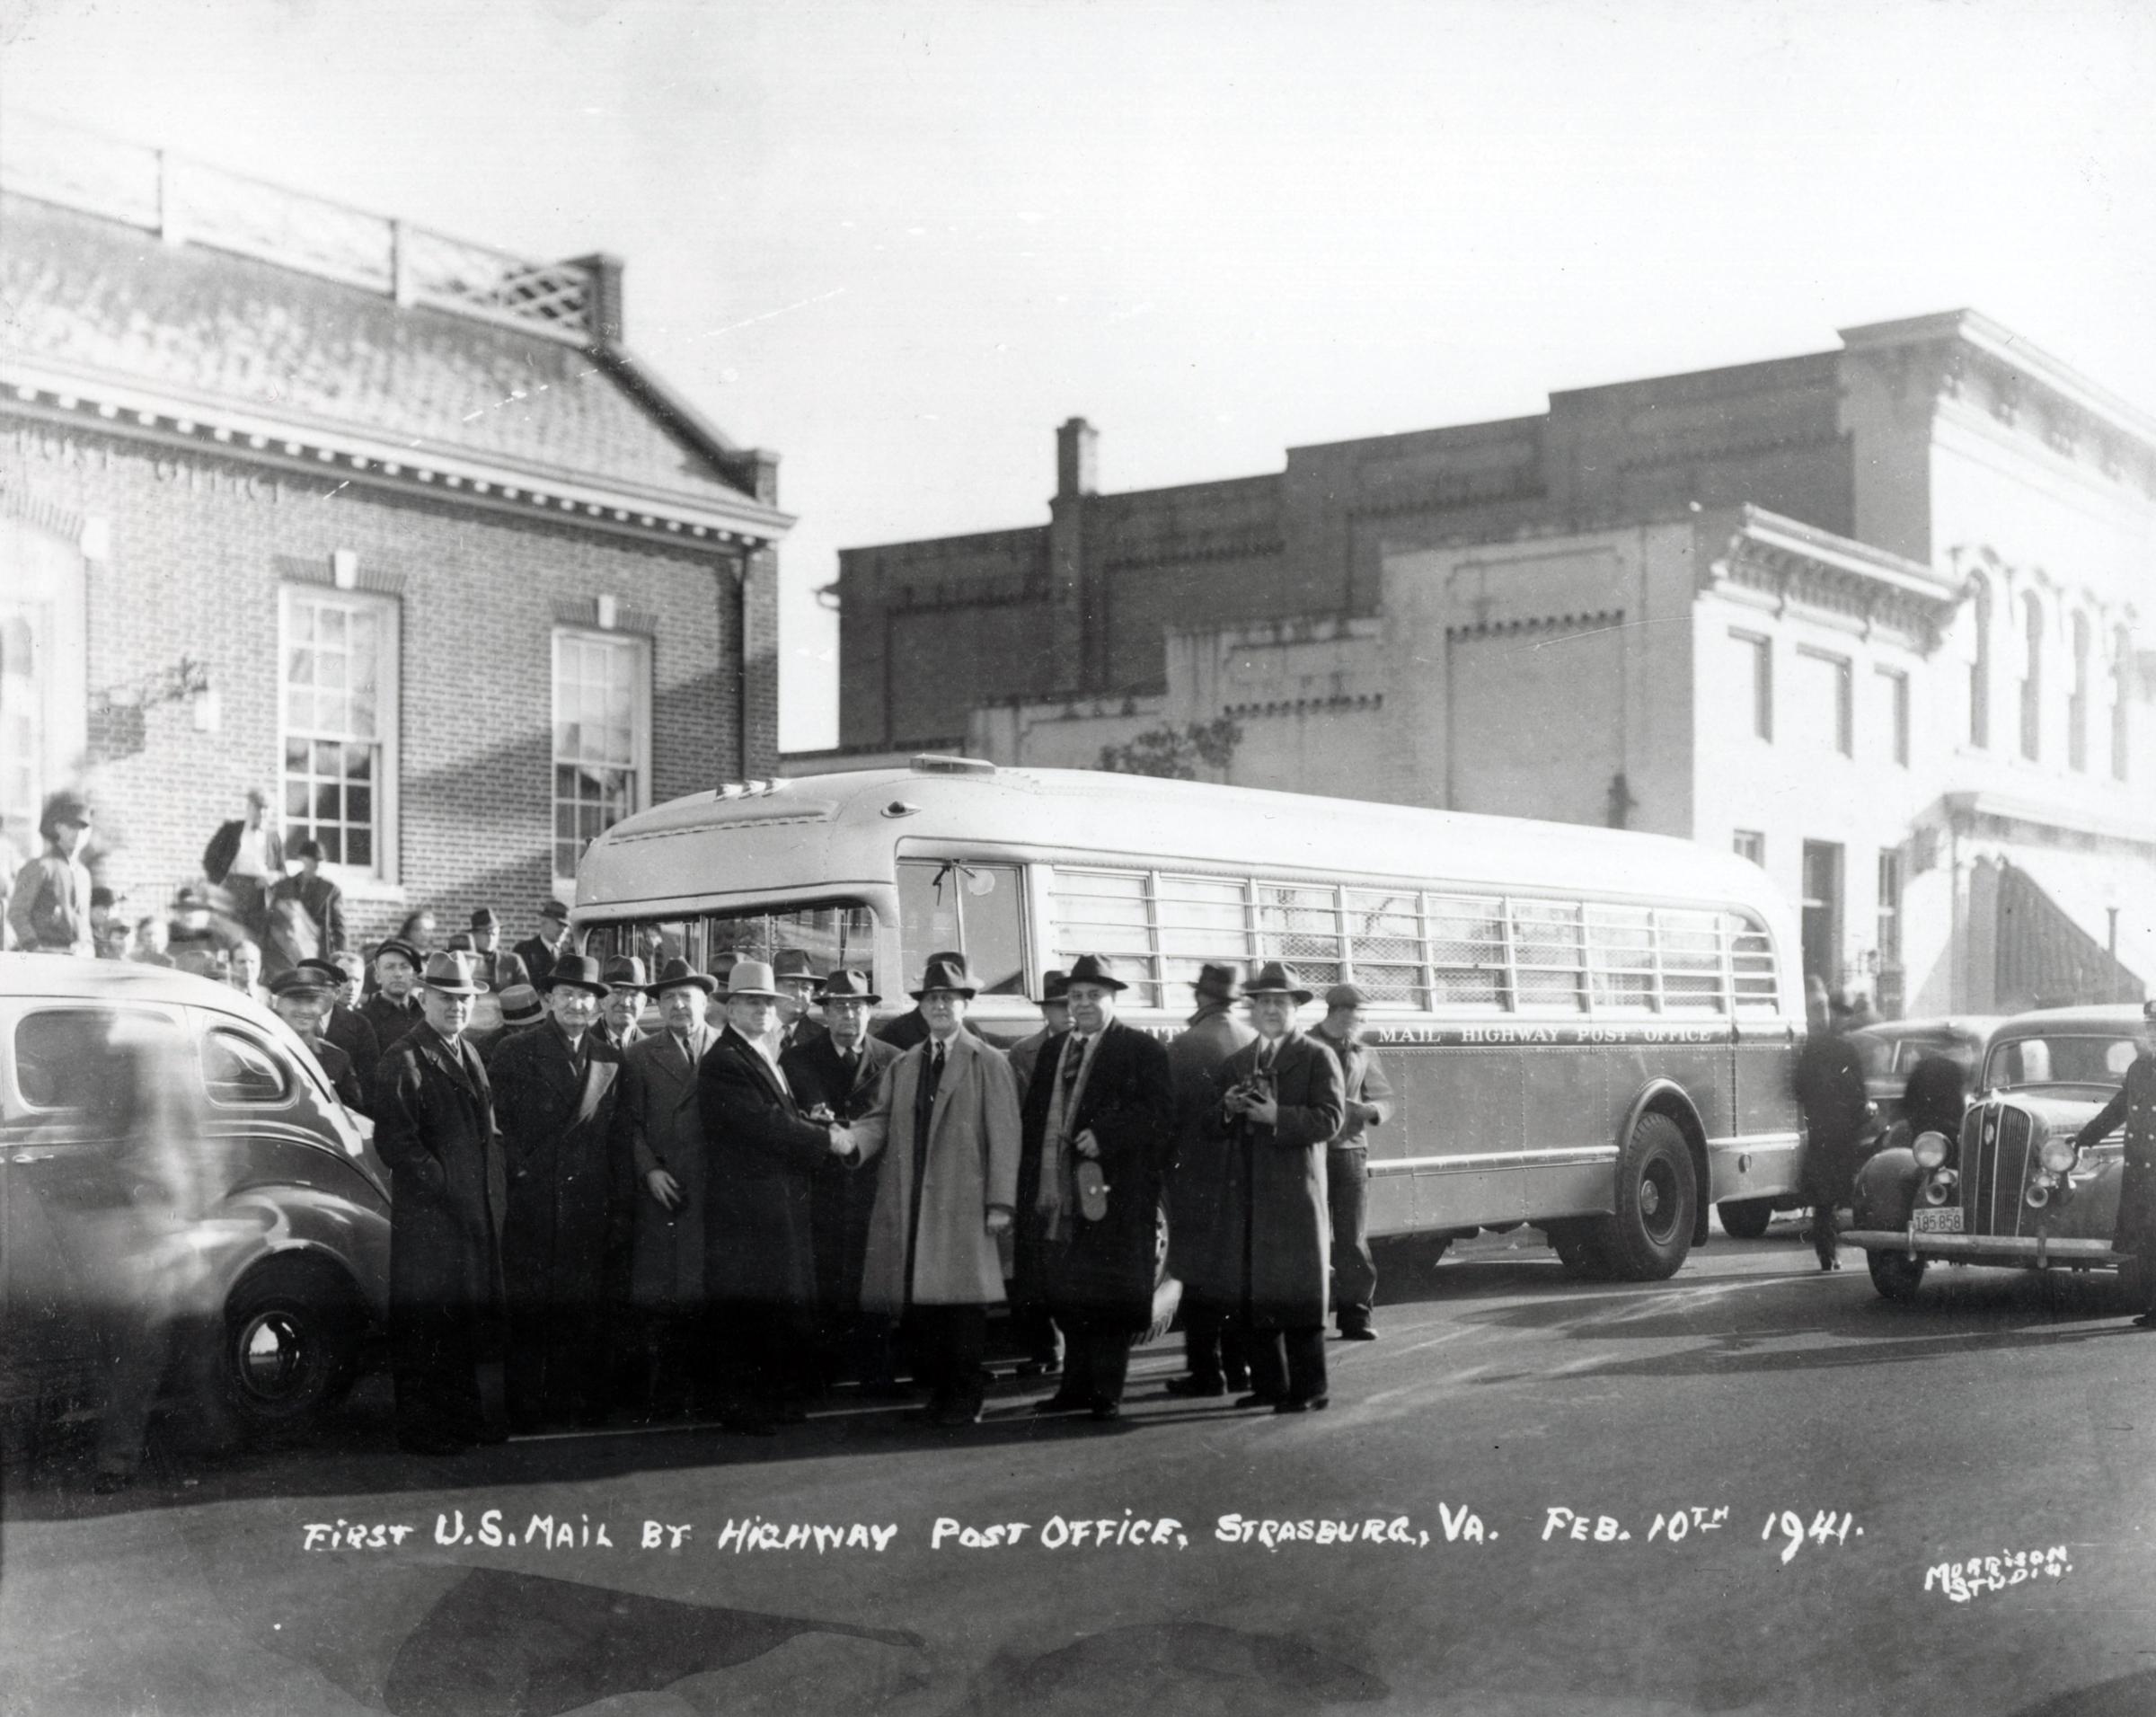 Officials are gathered to welcome the first Highway Post Office bus in Strasburg, Virginia on February 10, 1941. This bus traveled on a route between Washington, DC and Harrisonburg, Virginia. By the 1930s, a significant decline in railroad passenger traffic had caused a subsequent decline in the use of railway trains. To fill the void, the postal service transferred some en route distribution from trains to highway buses. This is the first Highway Post Office bus and is in the collection of the National Postal Museum. 1941.